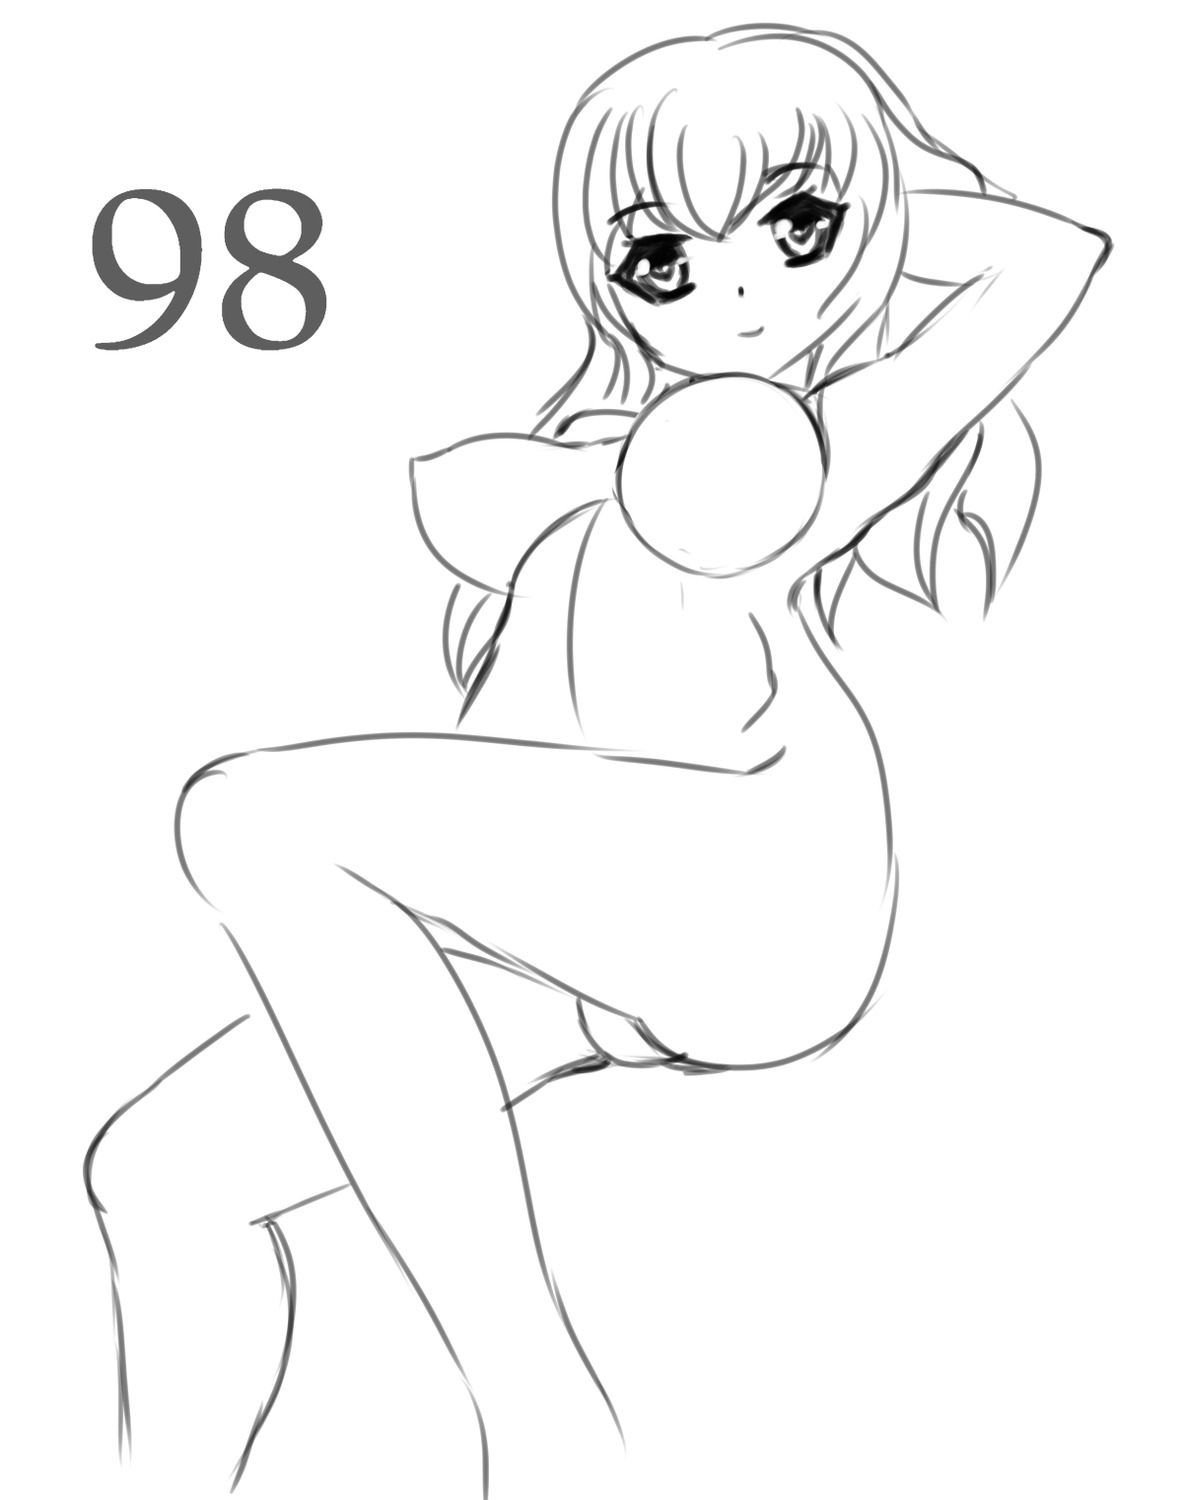 arms_up breasts long_hair madskillz_thread_oppic nude sketch smile